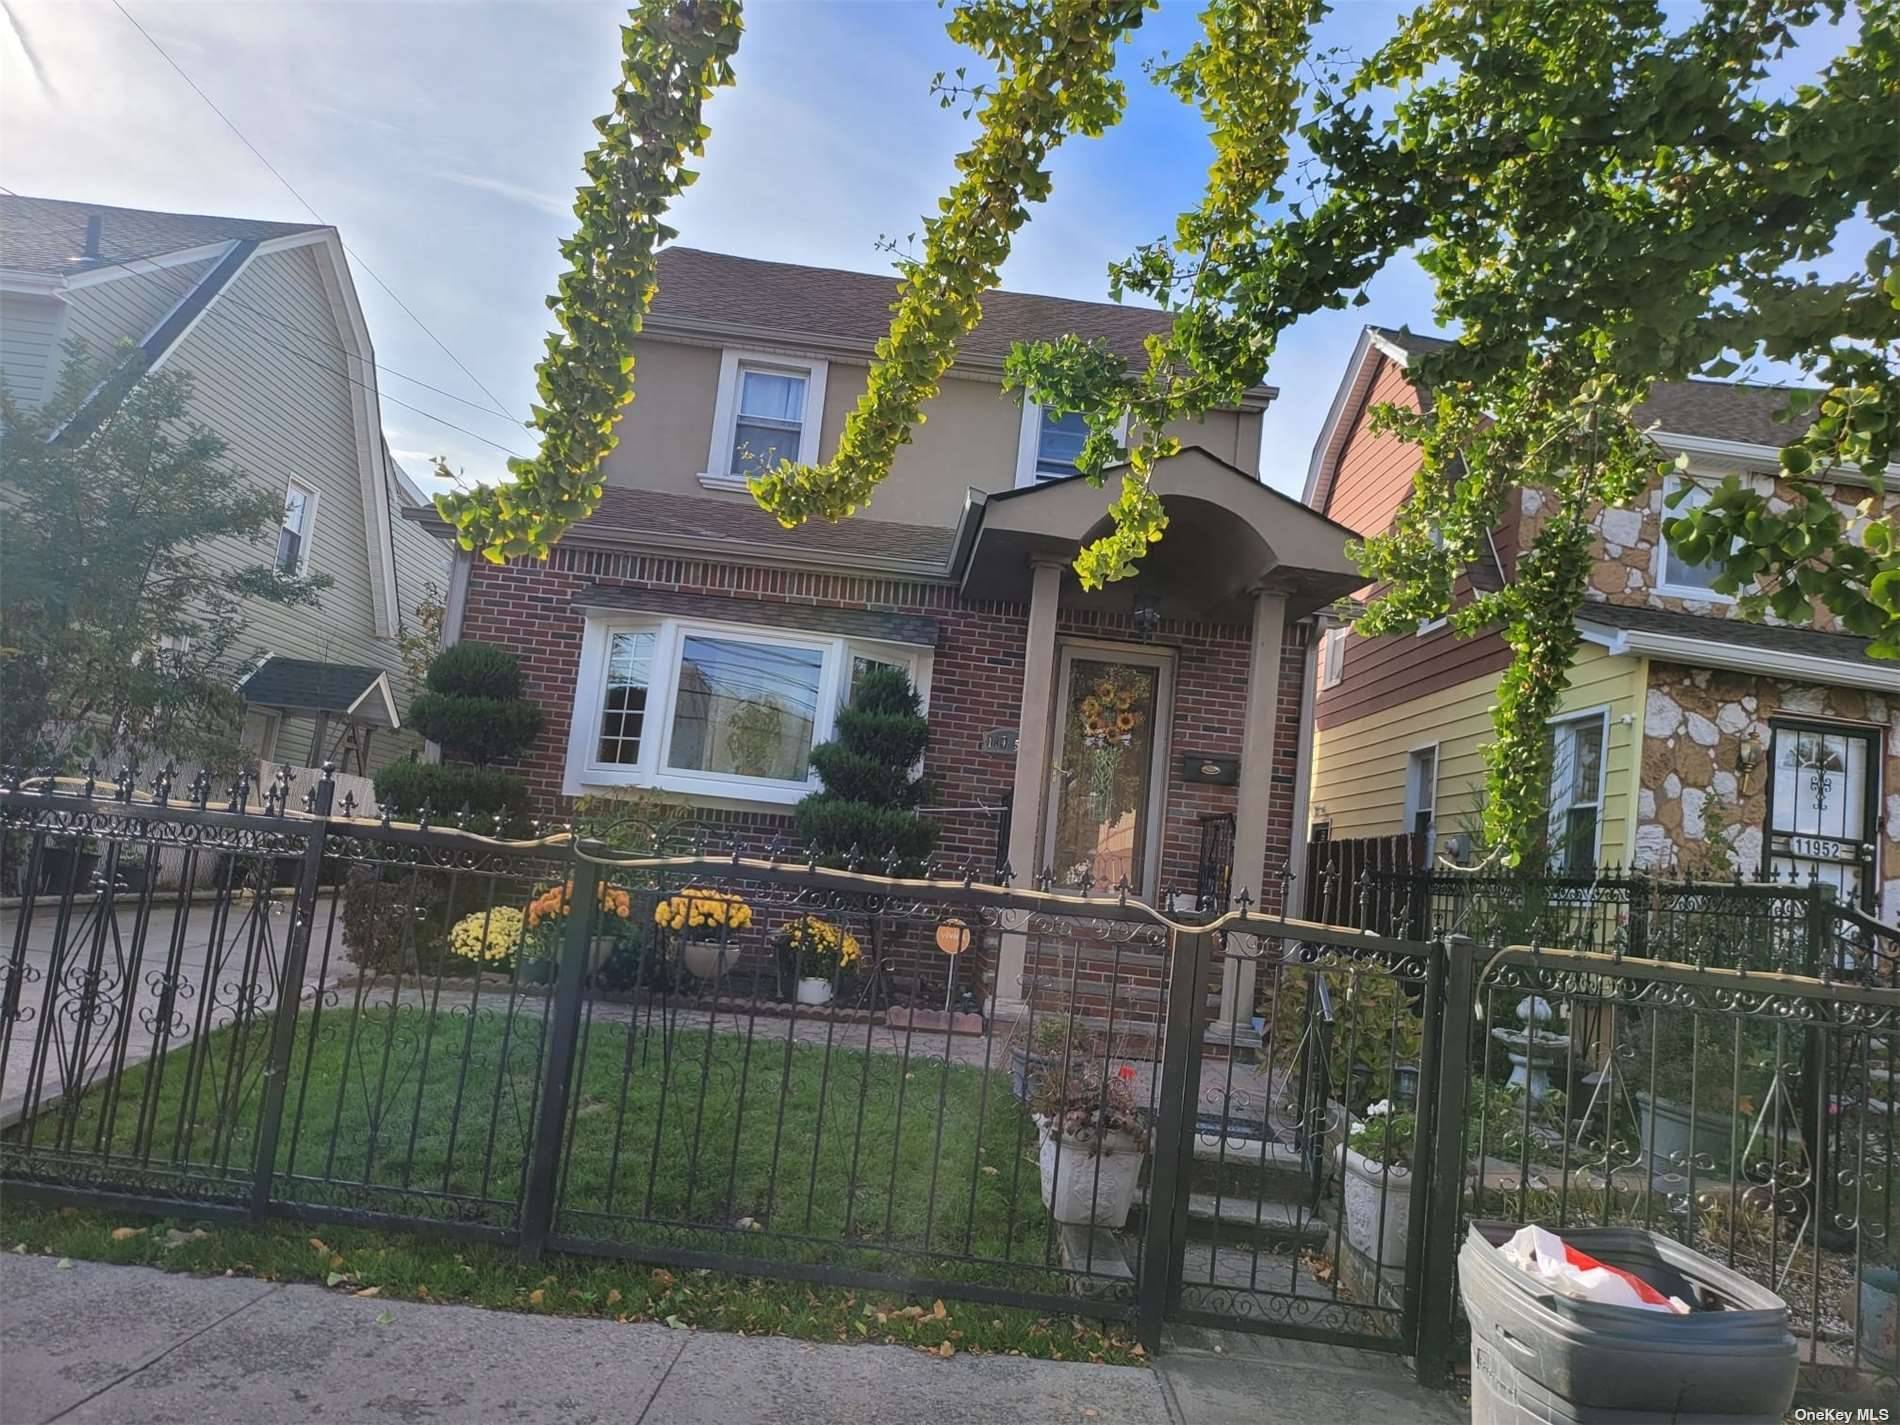 Come envision yourself and your family in this Beautiful, Well Maintained 1 Family home, which features 4 Spacious Bedrooms, 3 Full Bathrooms, Updated Kitchen with top of the line Stainless ...